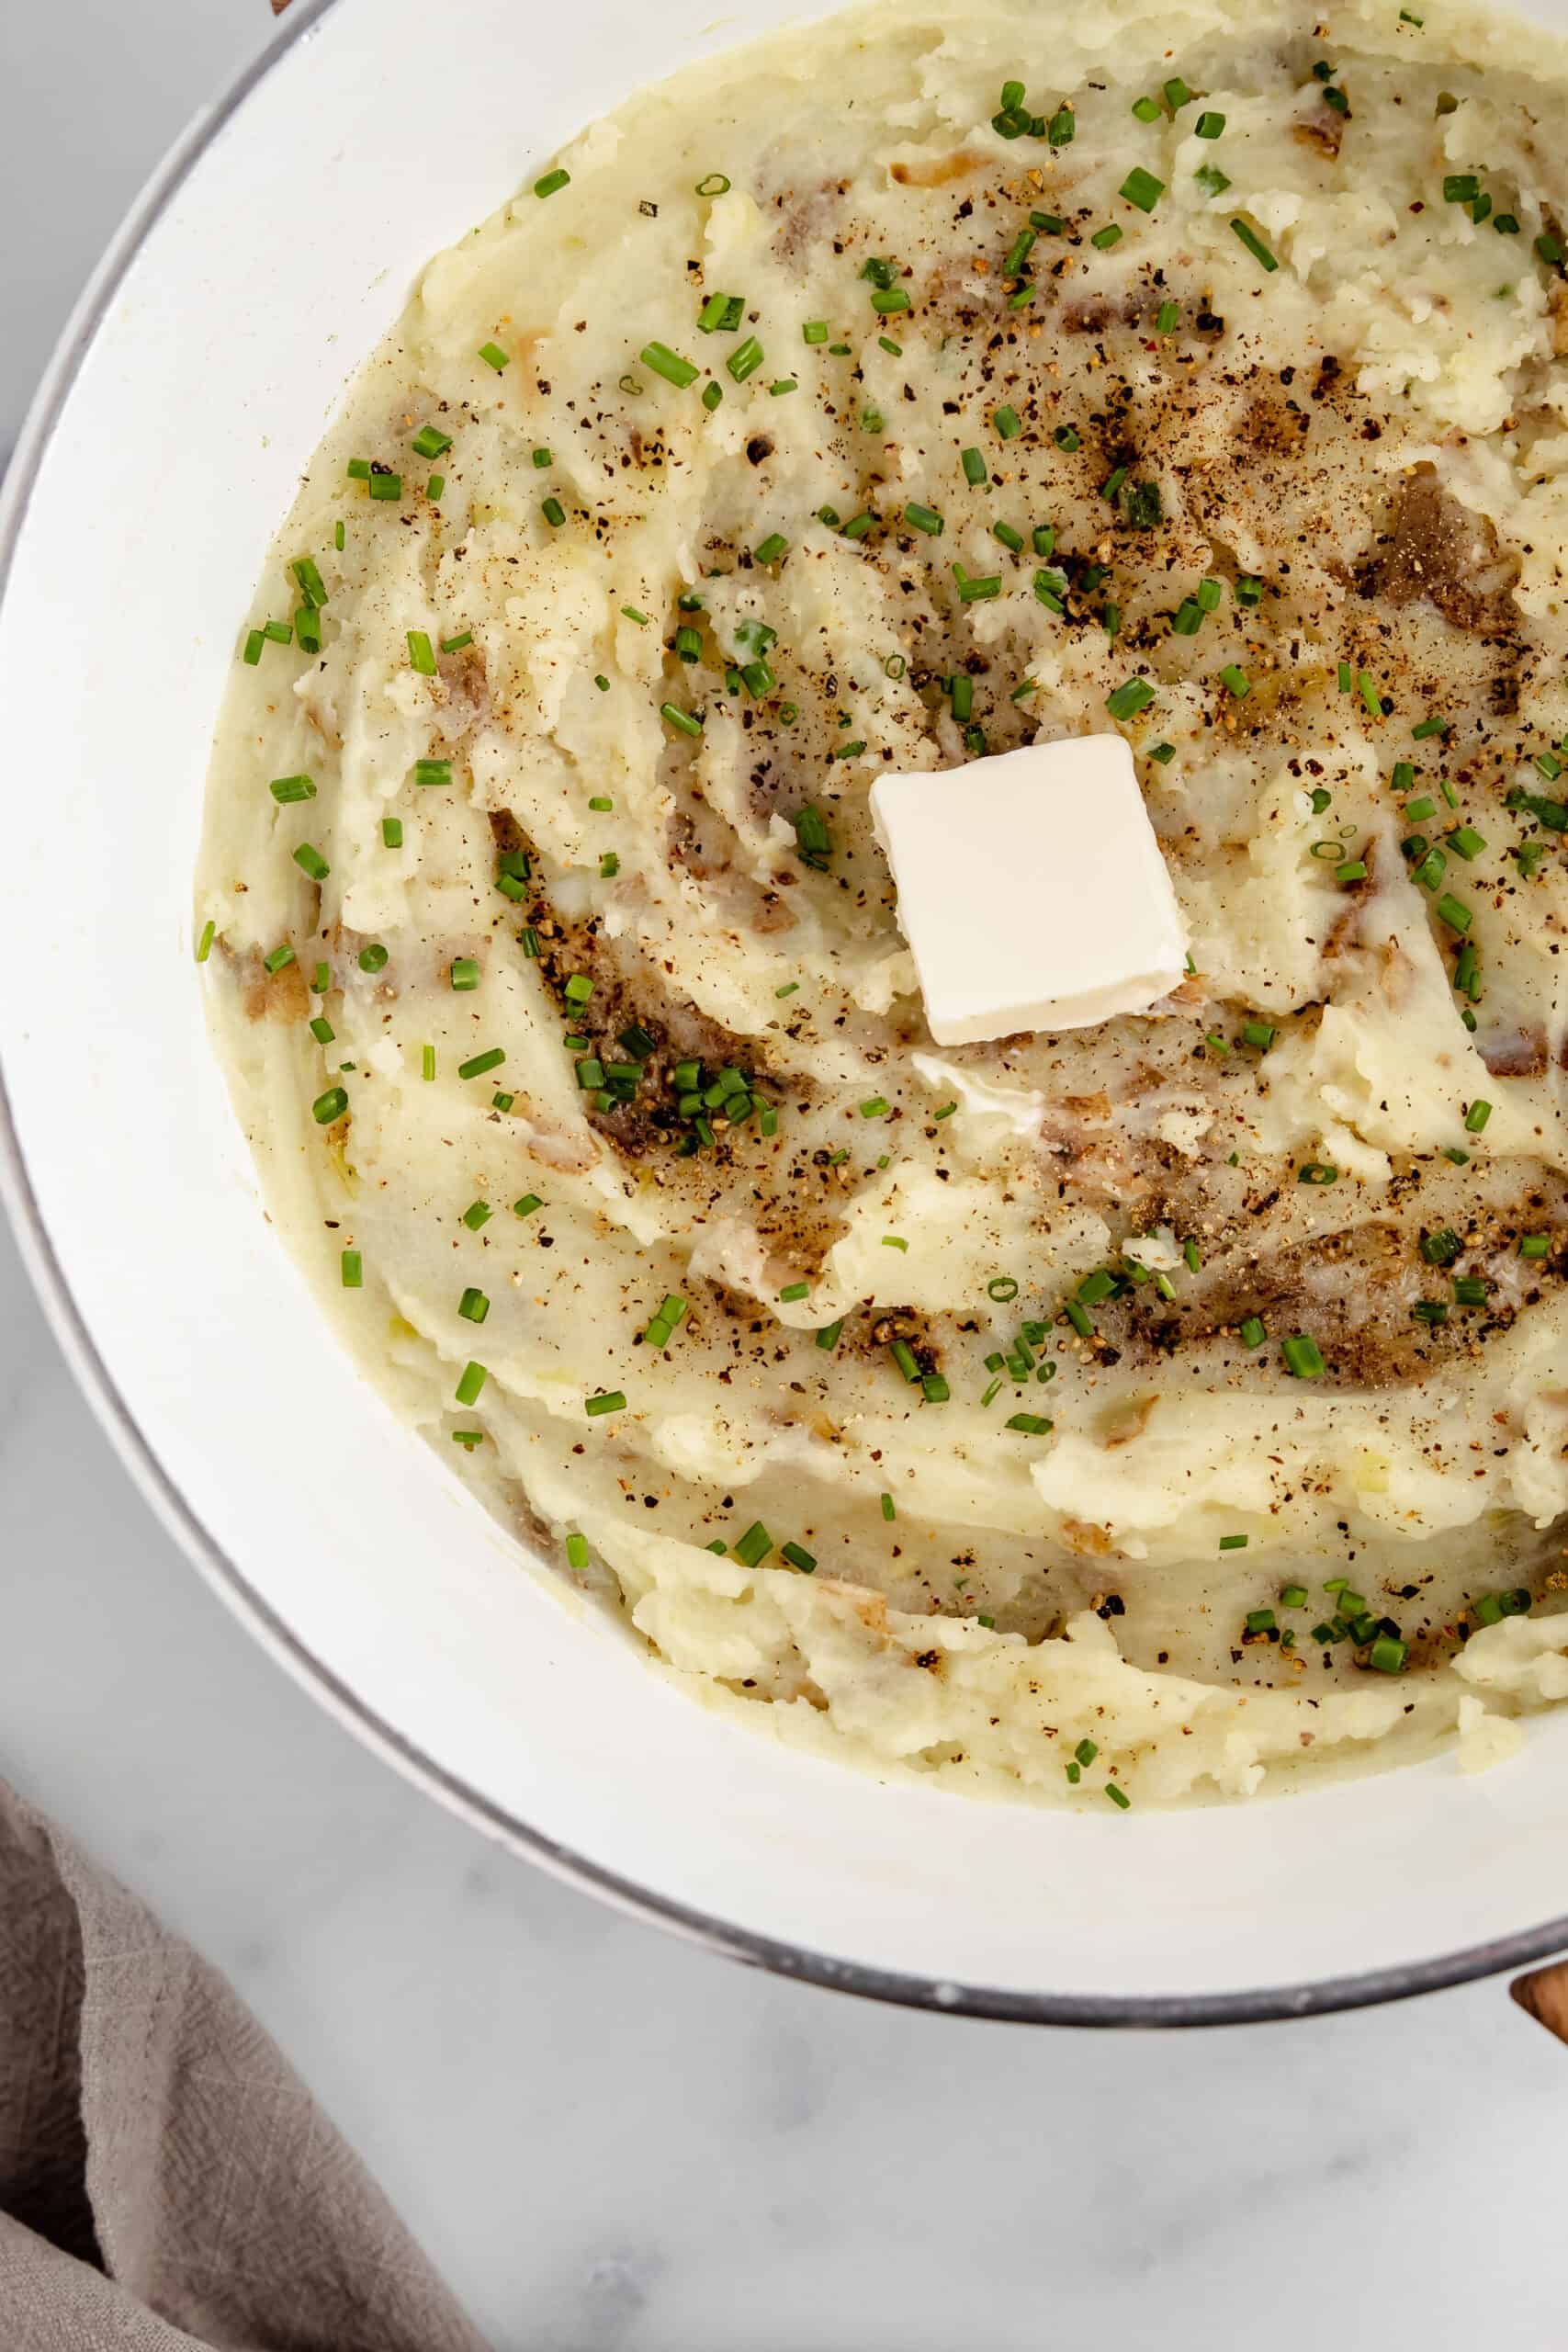 A bowl of mashed potatoes topped with salt, pepper, butter, and chives.